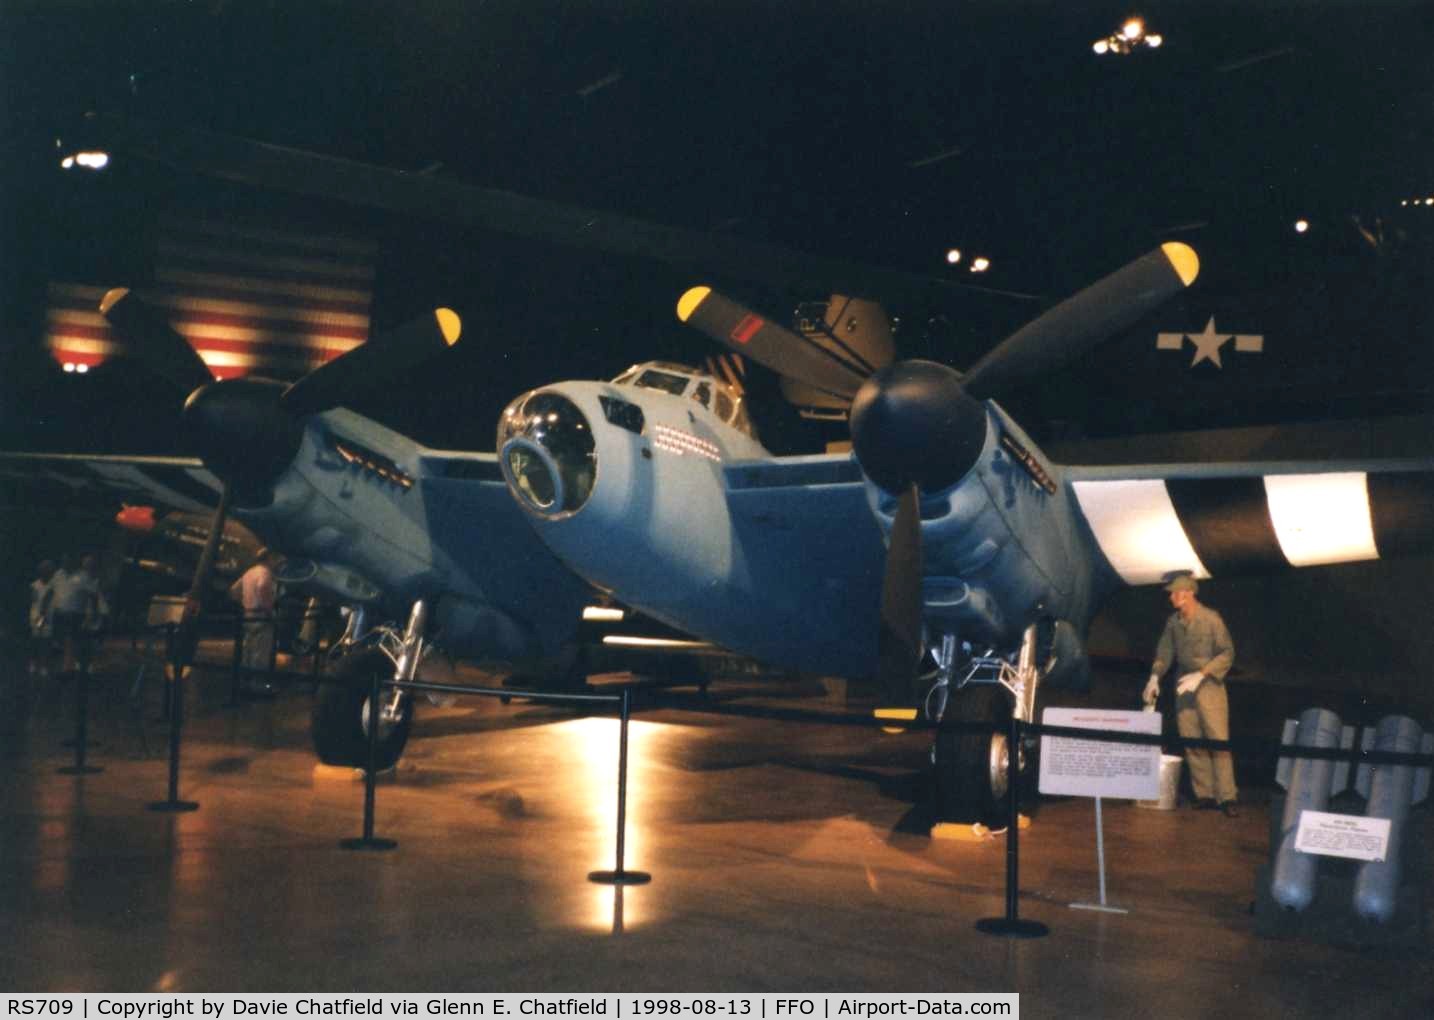 RS709, 1946 De Havilland DH-98 Mosquito B Mk.35 C/N Not found, Mosquito B. Mk. 35 at the National Museum of the U.S. Air Force